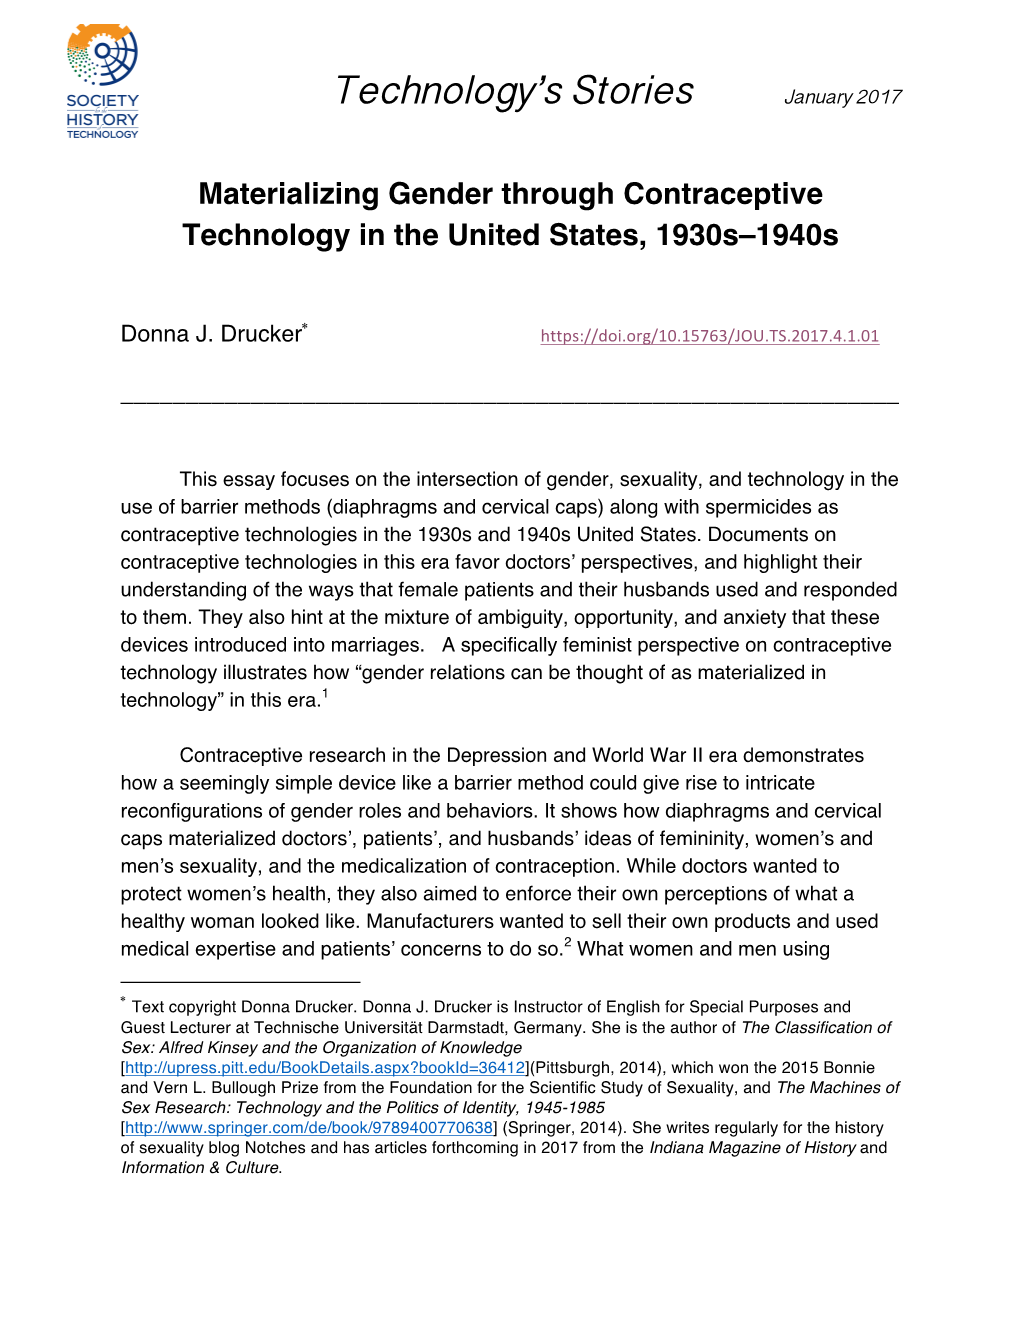 Materializing Gender Through Contraceptive Technology in the United States, 1930S–1940S